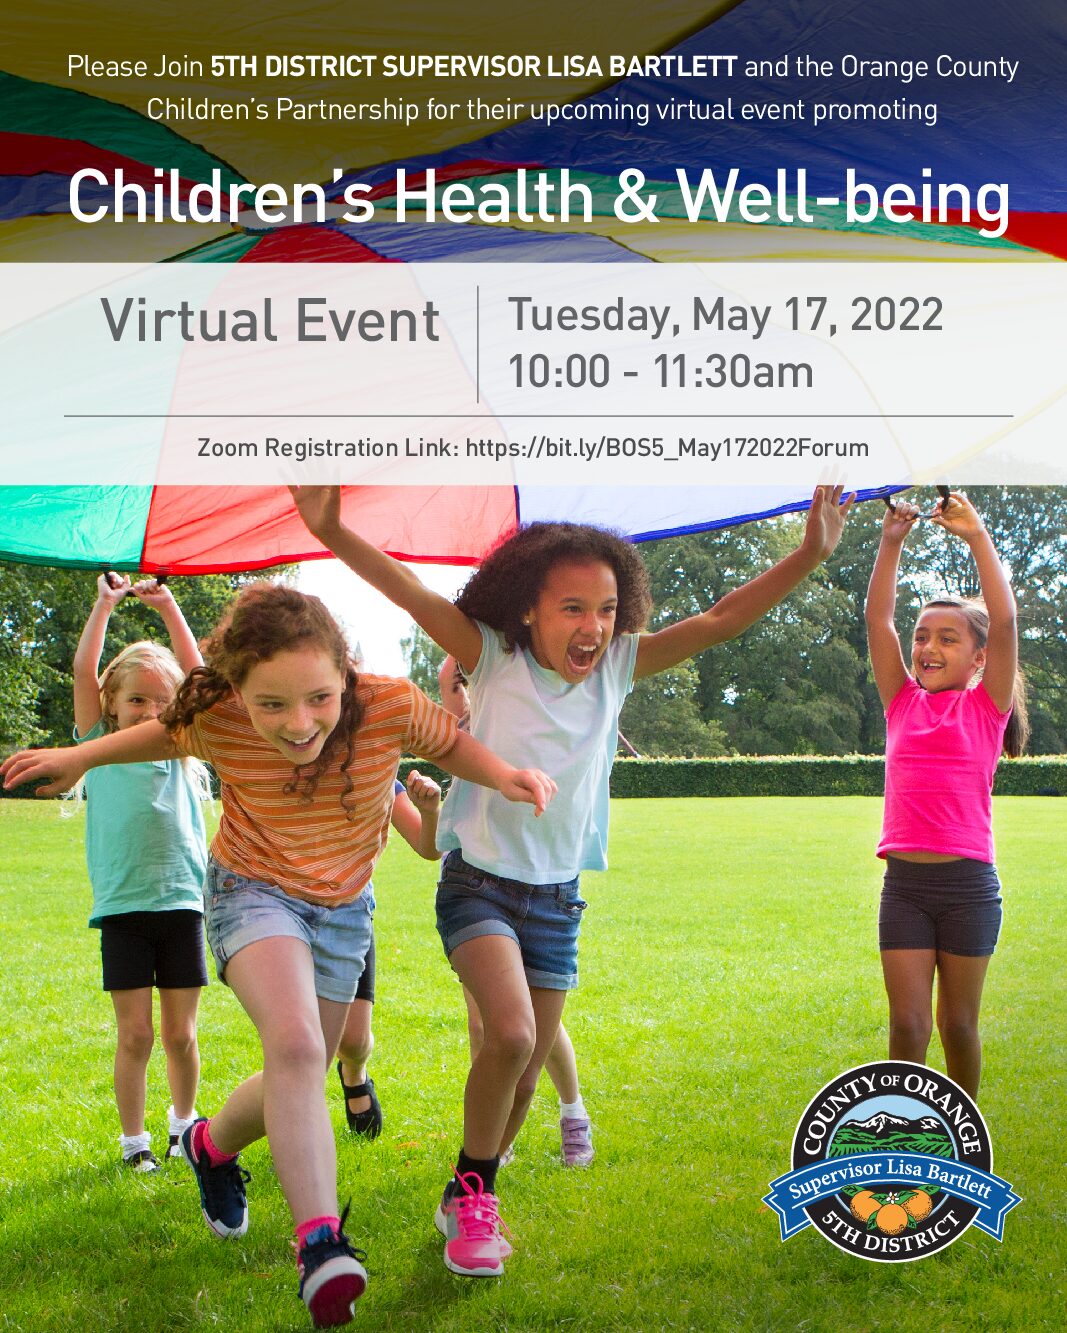 Register now for virtual discussion of Children’s Health & Well-being in Orange County